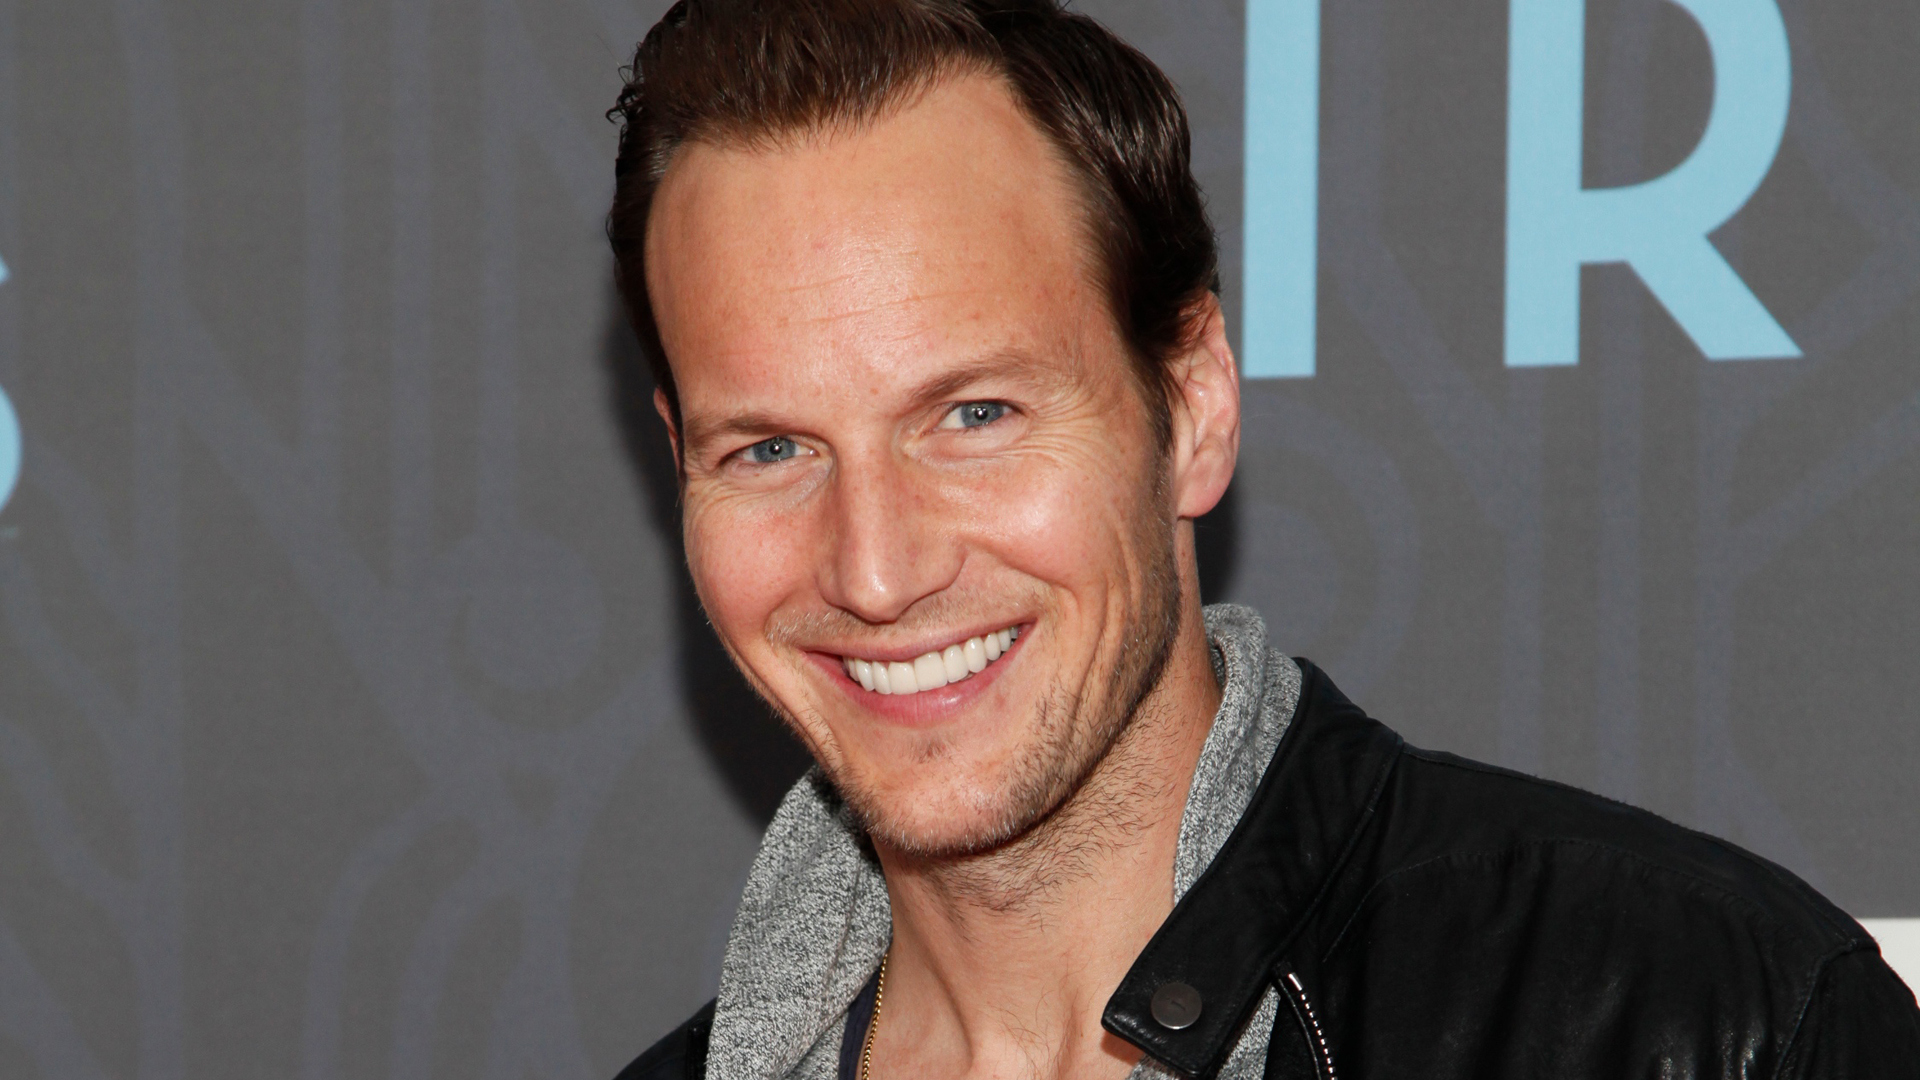 More about actor Patrick Wilson